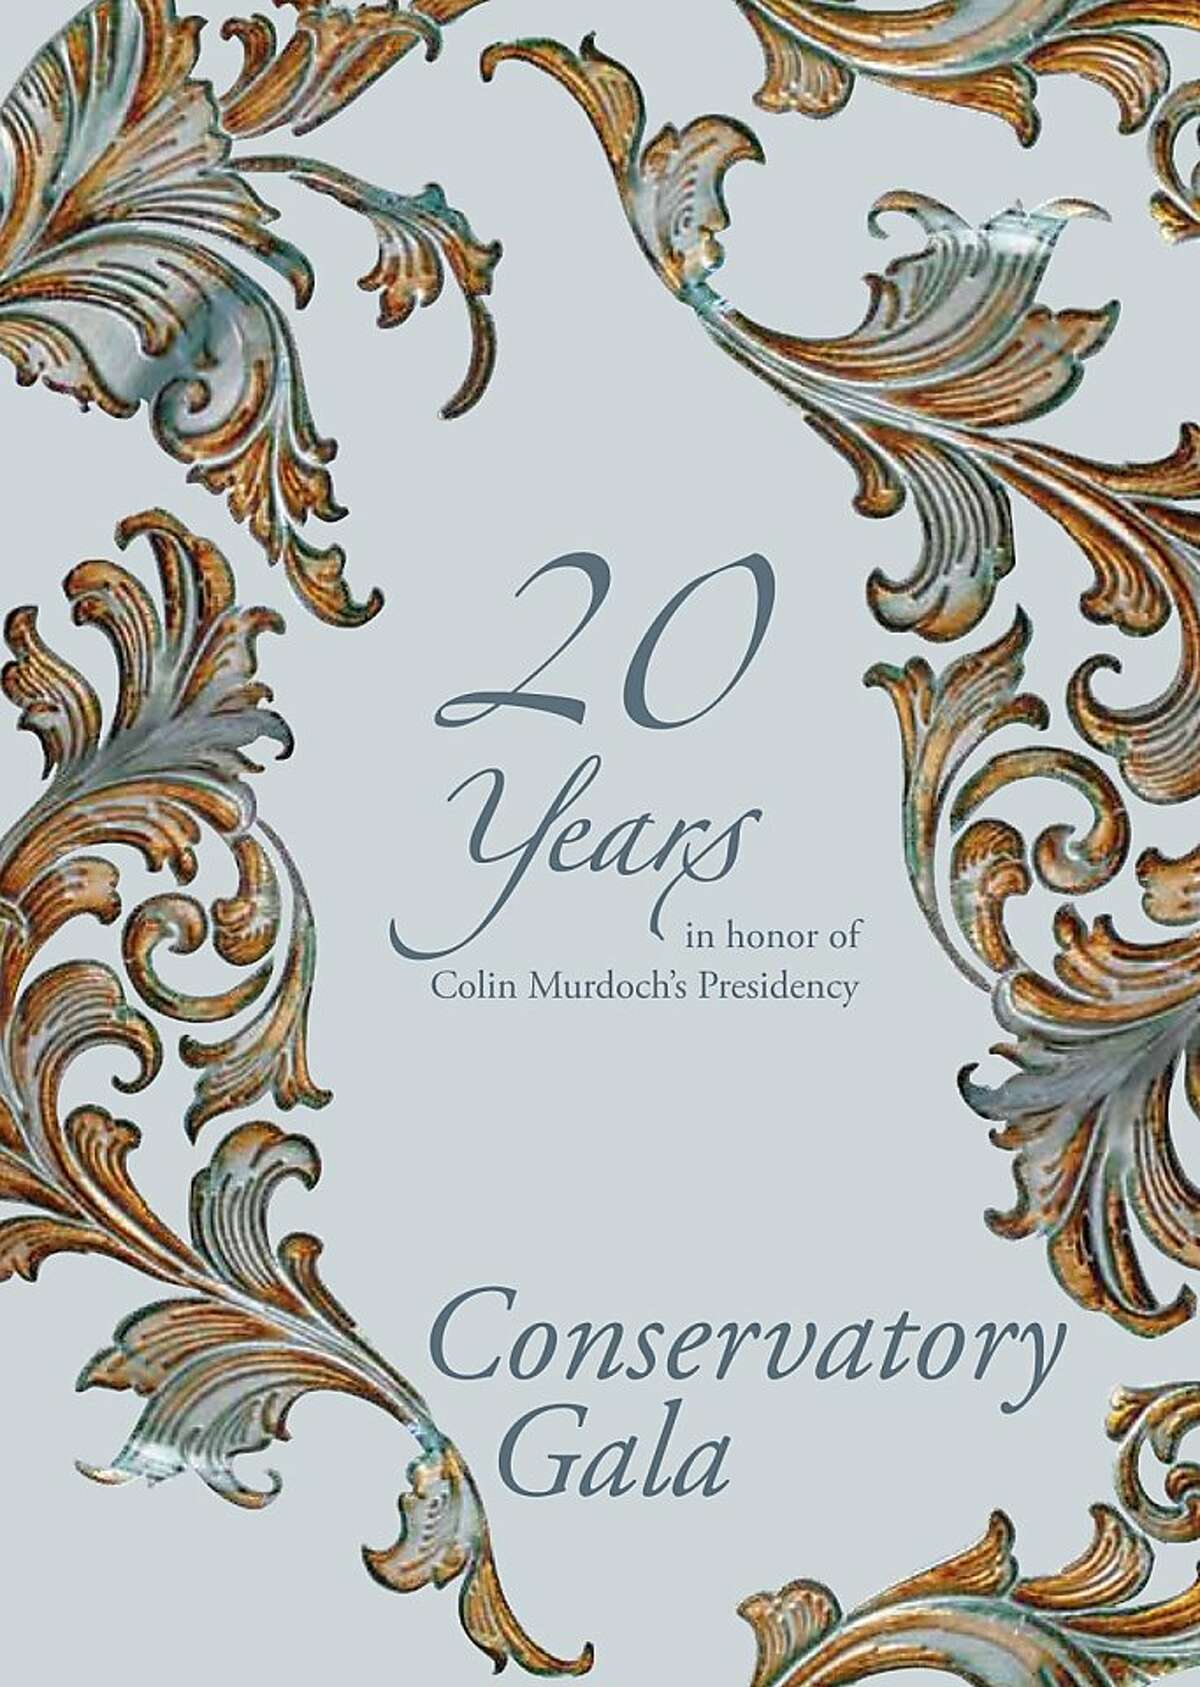 20 years in honor of Colin Murdoch's Presidency. Marie-Jose and Kent Baum, co-chairs cordially invite you to the Conservatory Gala celebrating Colin Murdoch's 20th Anniversary as President of the Conservatory. Tuesday, April 24, 2012